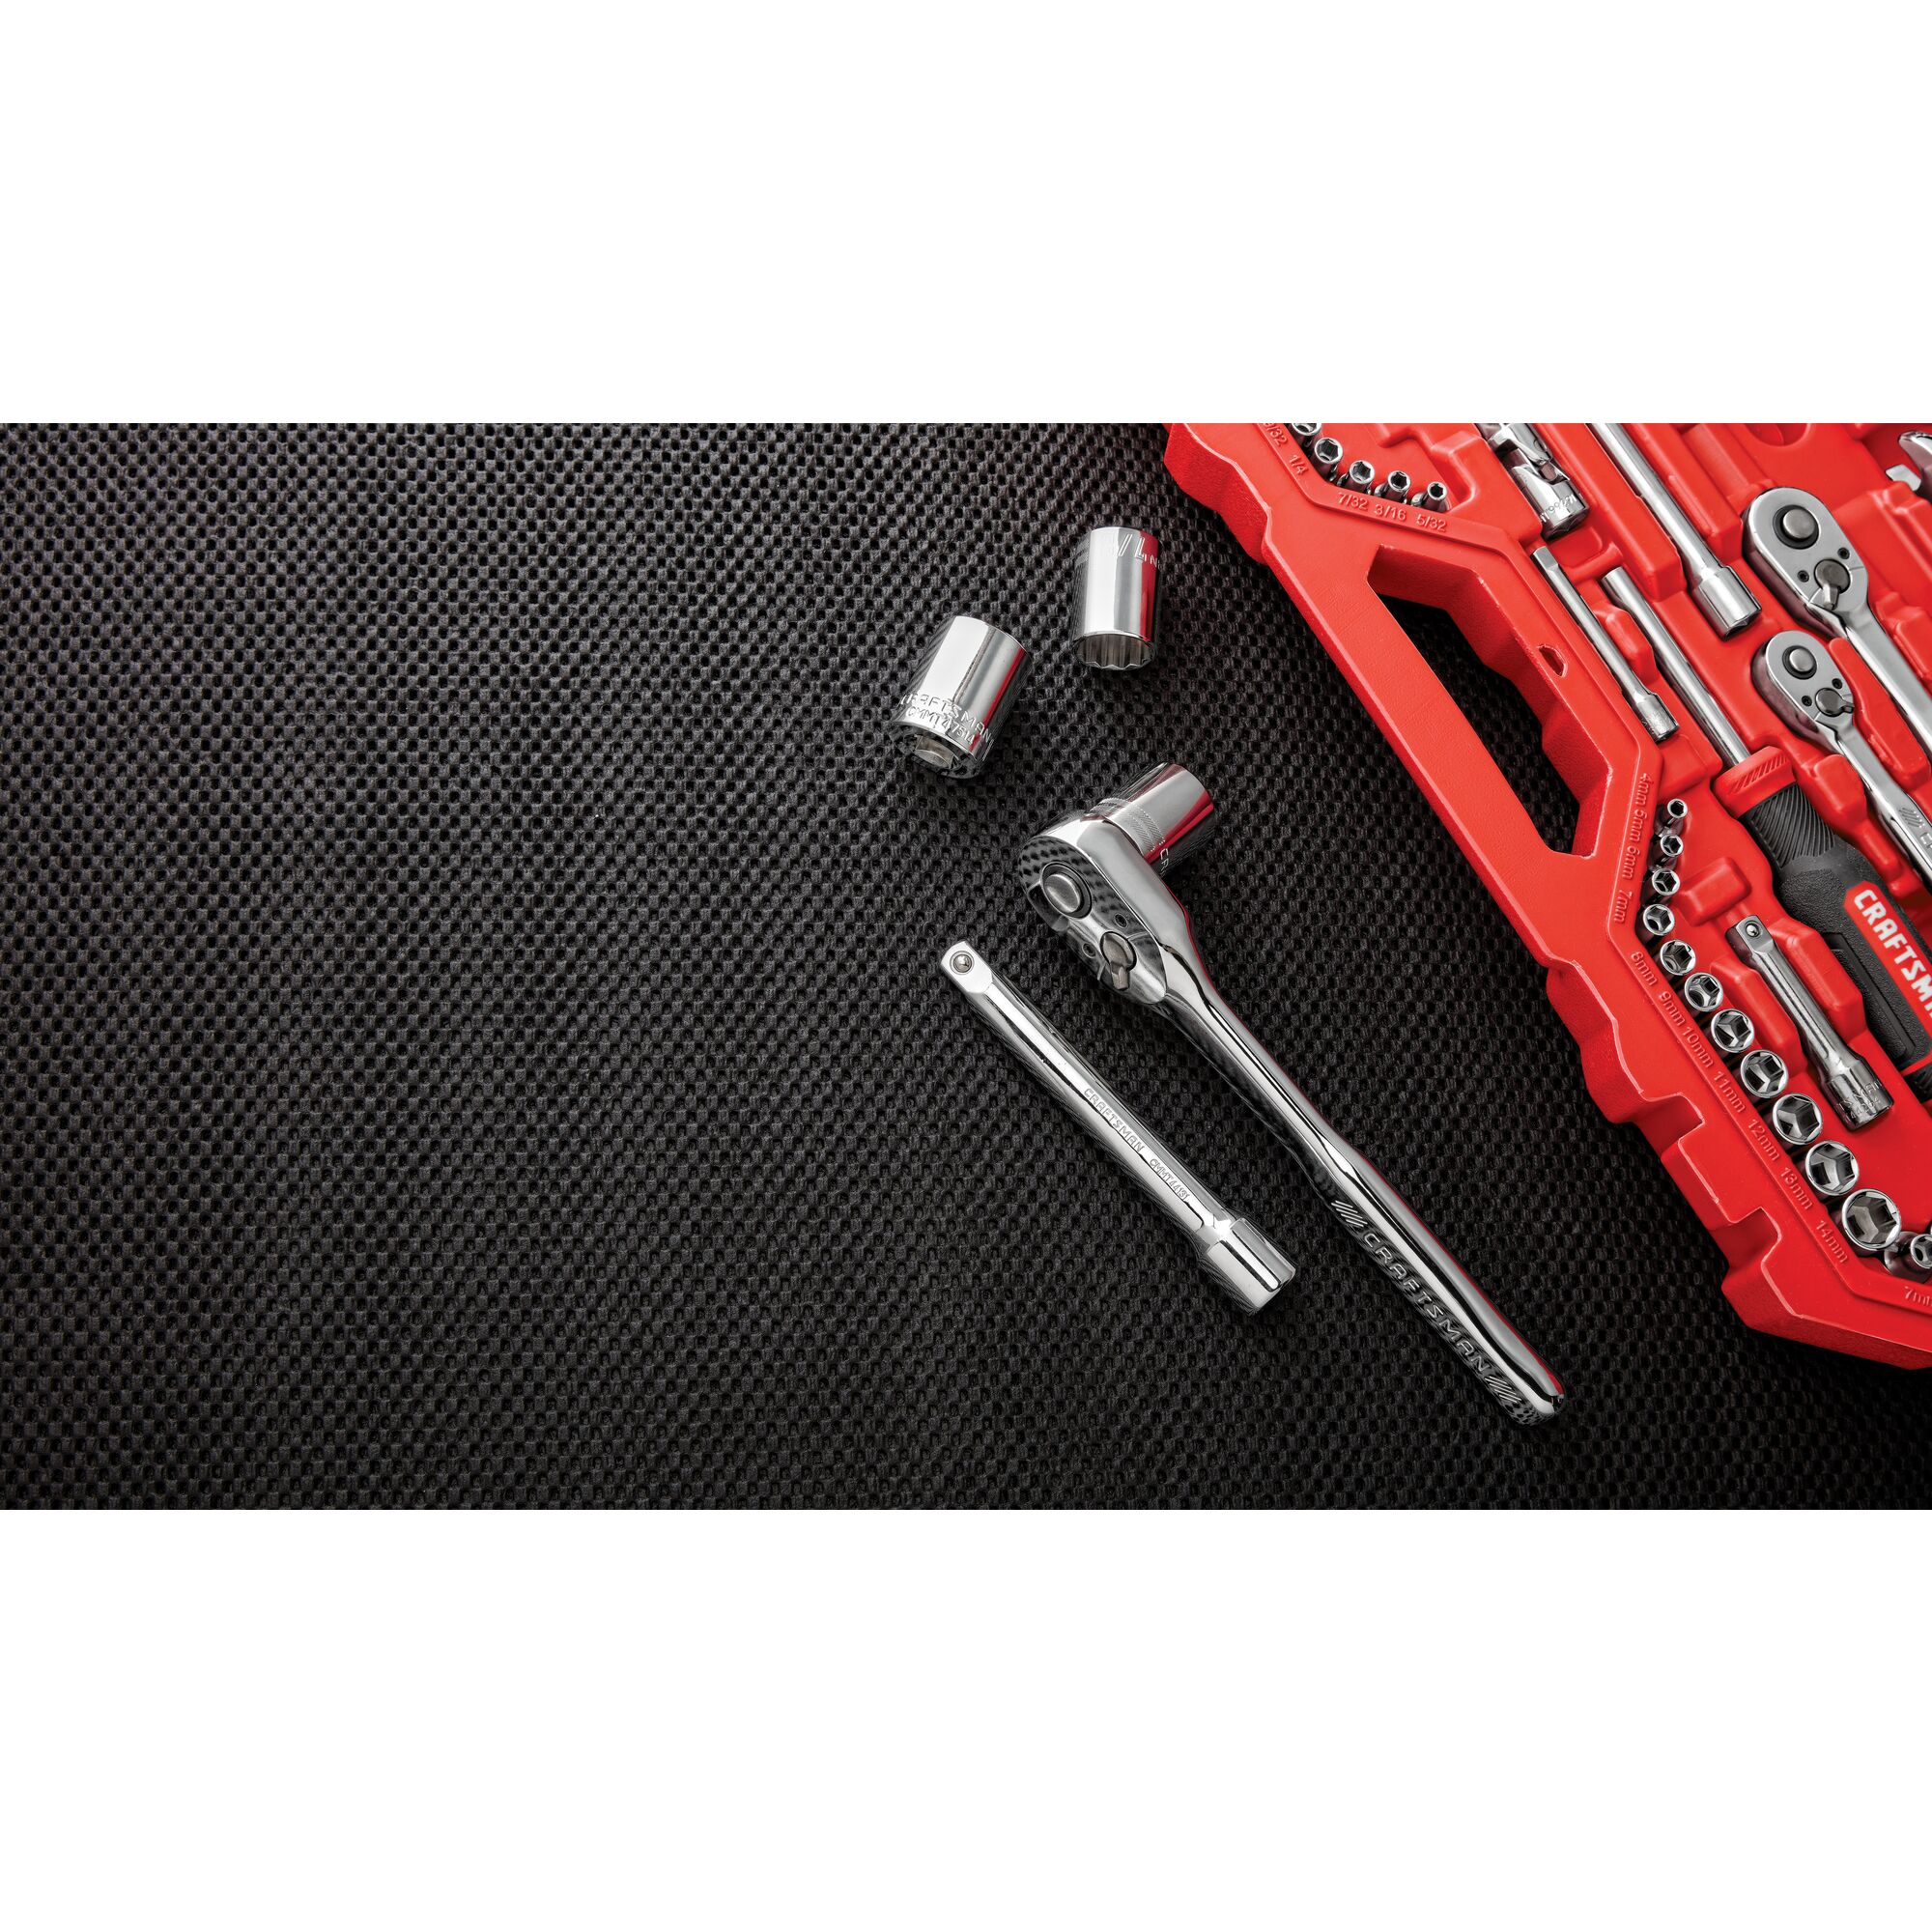 View of CRAFTSMAN Mechanics Tool Set highlighting  product features